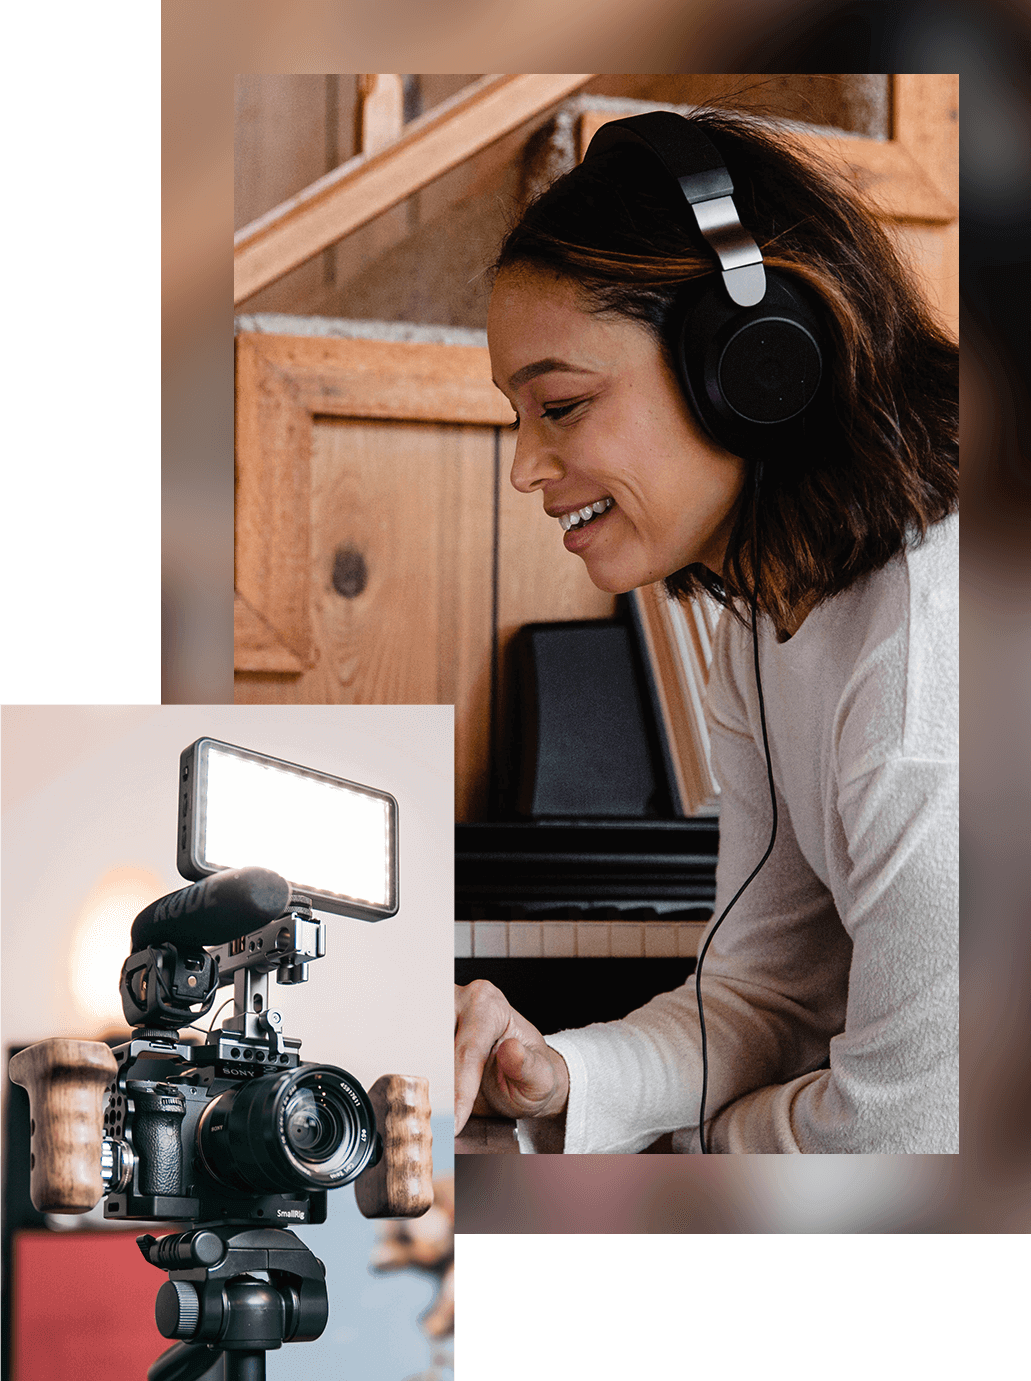 Woman working on photography project with headphones on